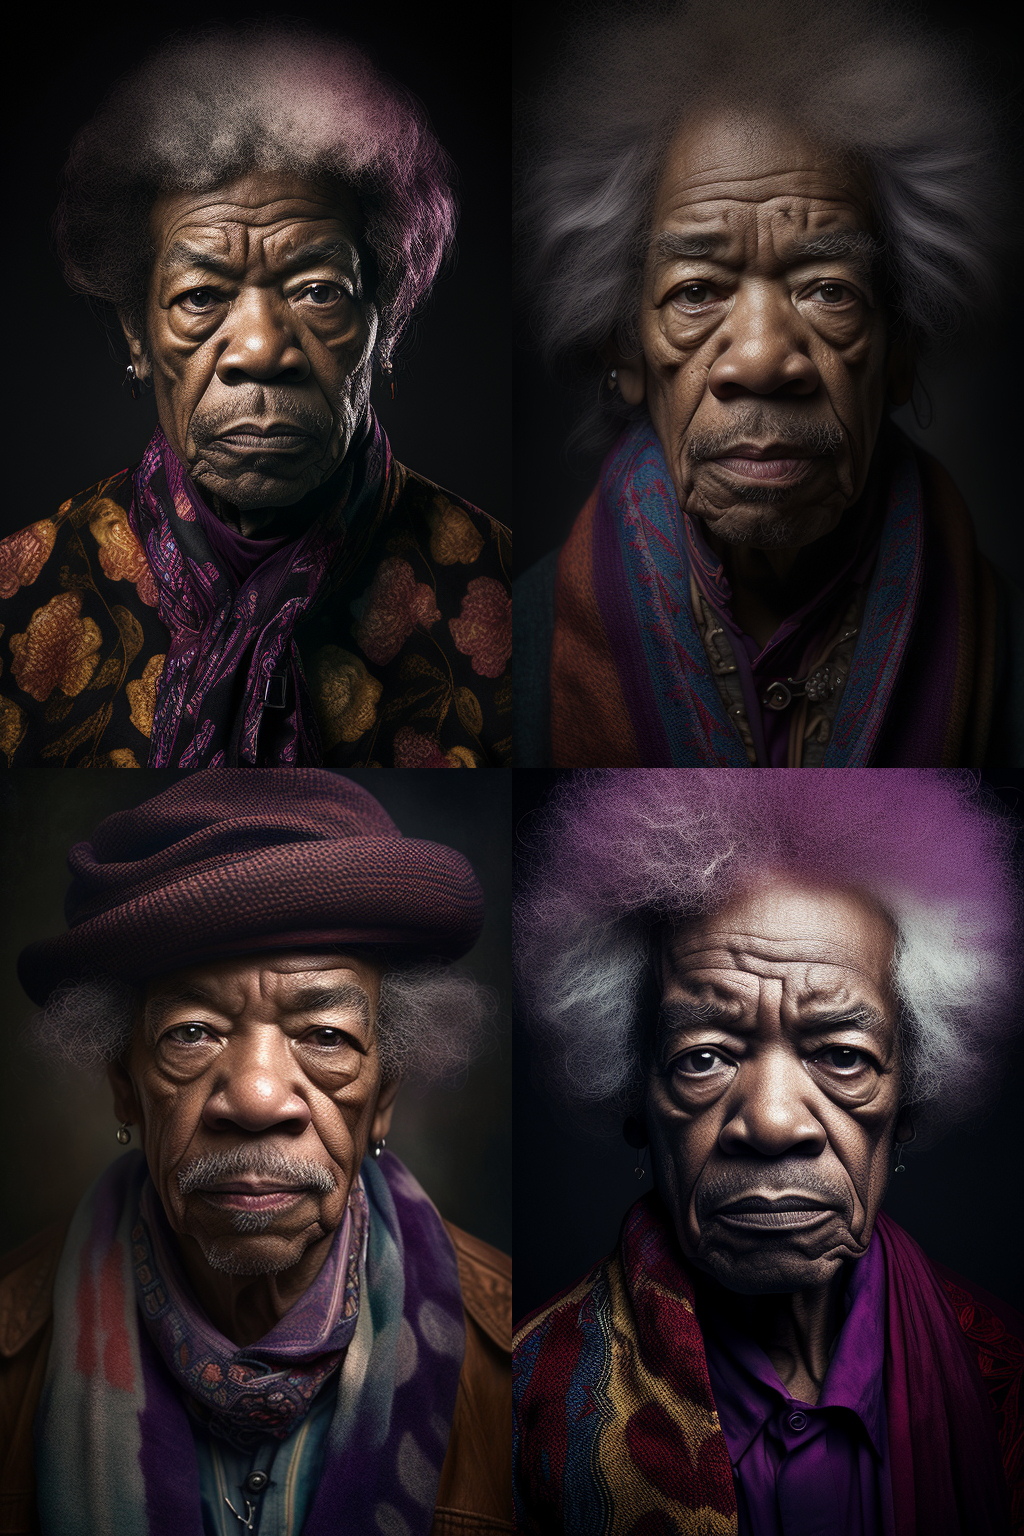 What Would Jimi Hendrix Look Like If He Were Alive Today?